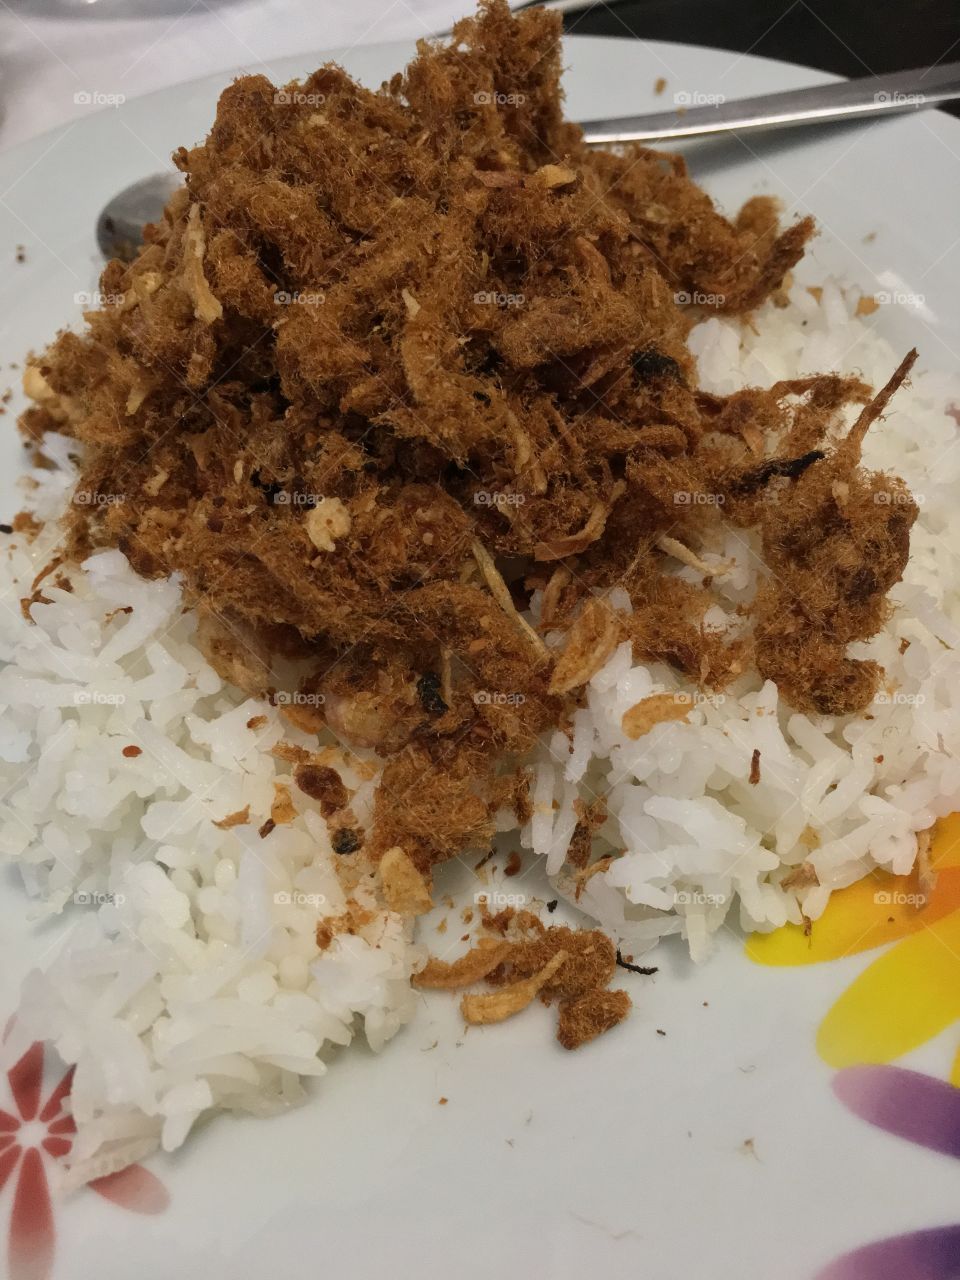 Rice with abon, one of traditional food from Indonesia